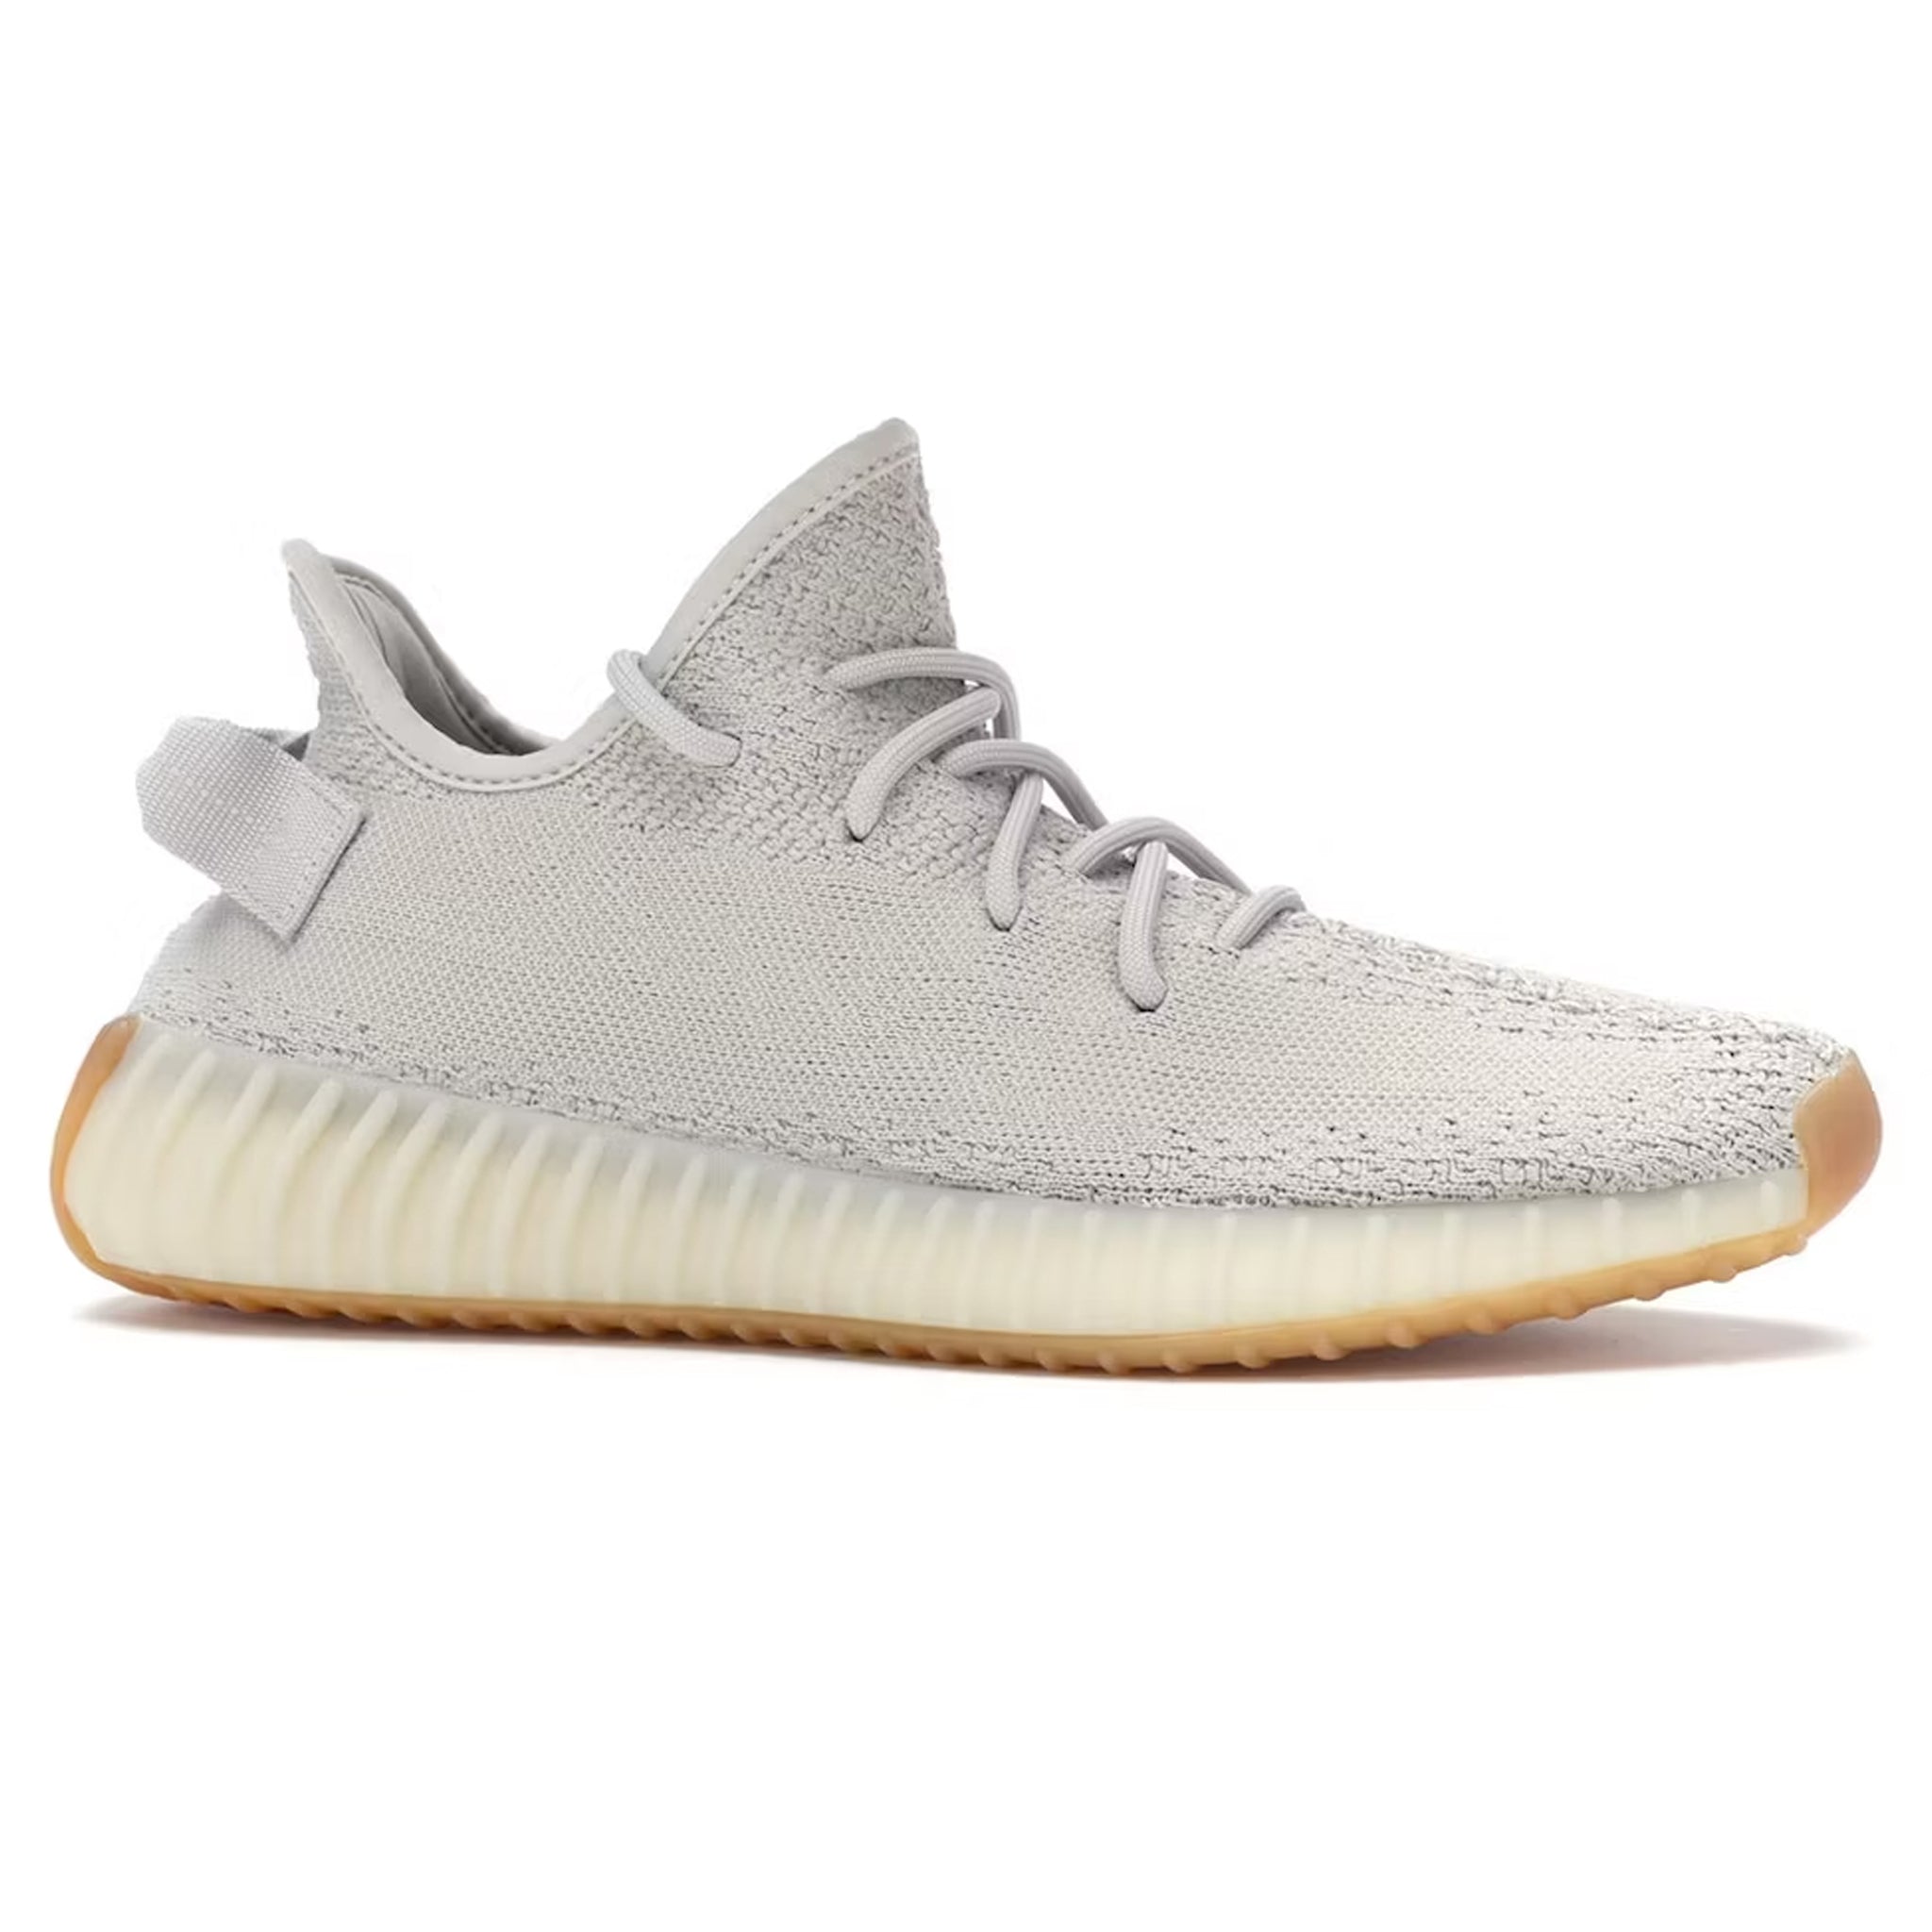 Front view of Adidas Yeezy Boost 350 V2 Sesame F99710